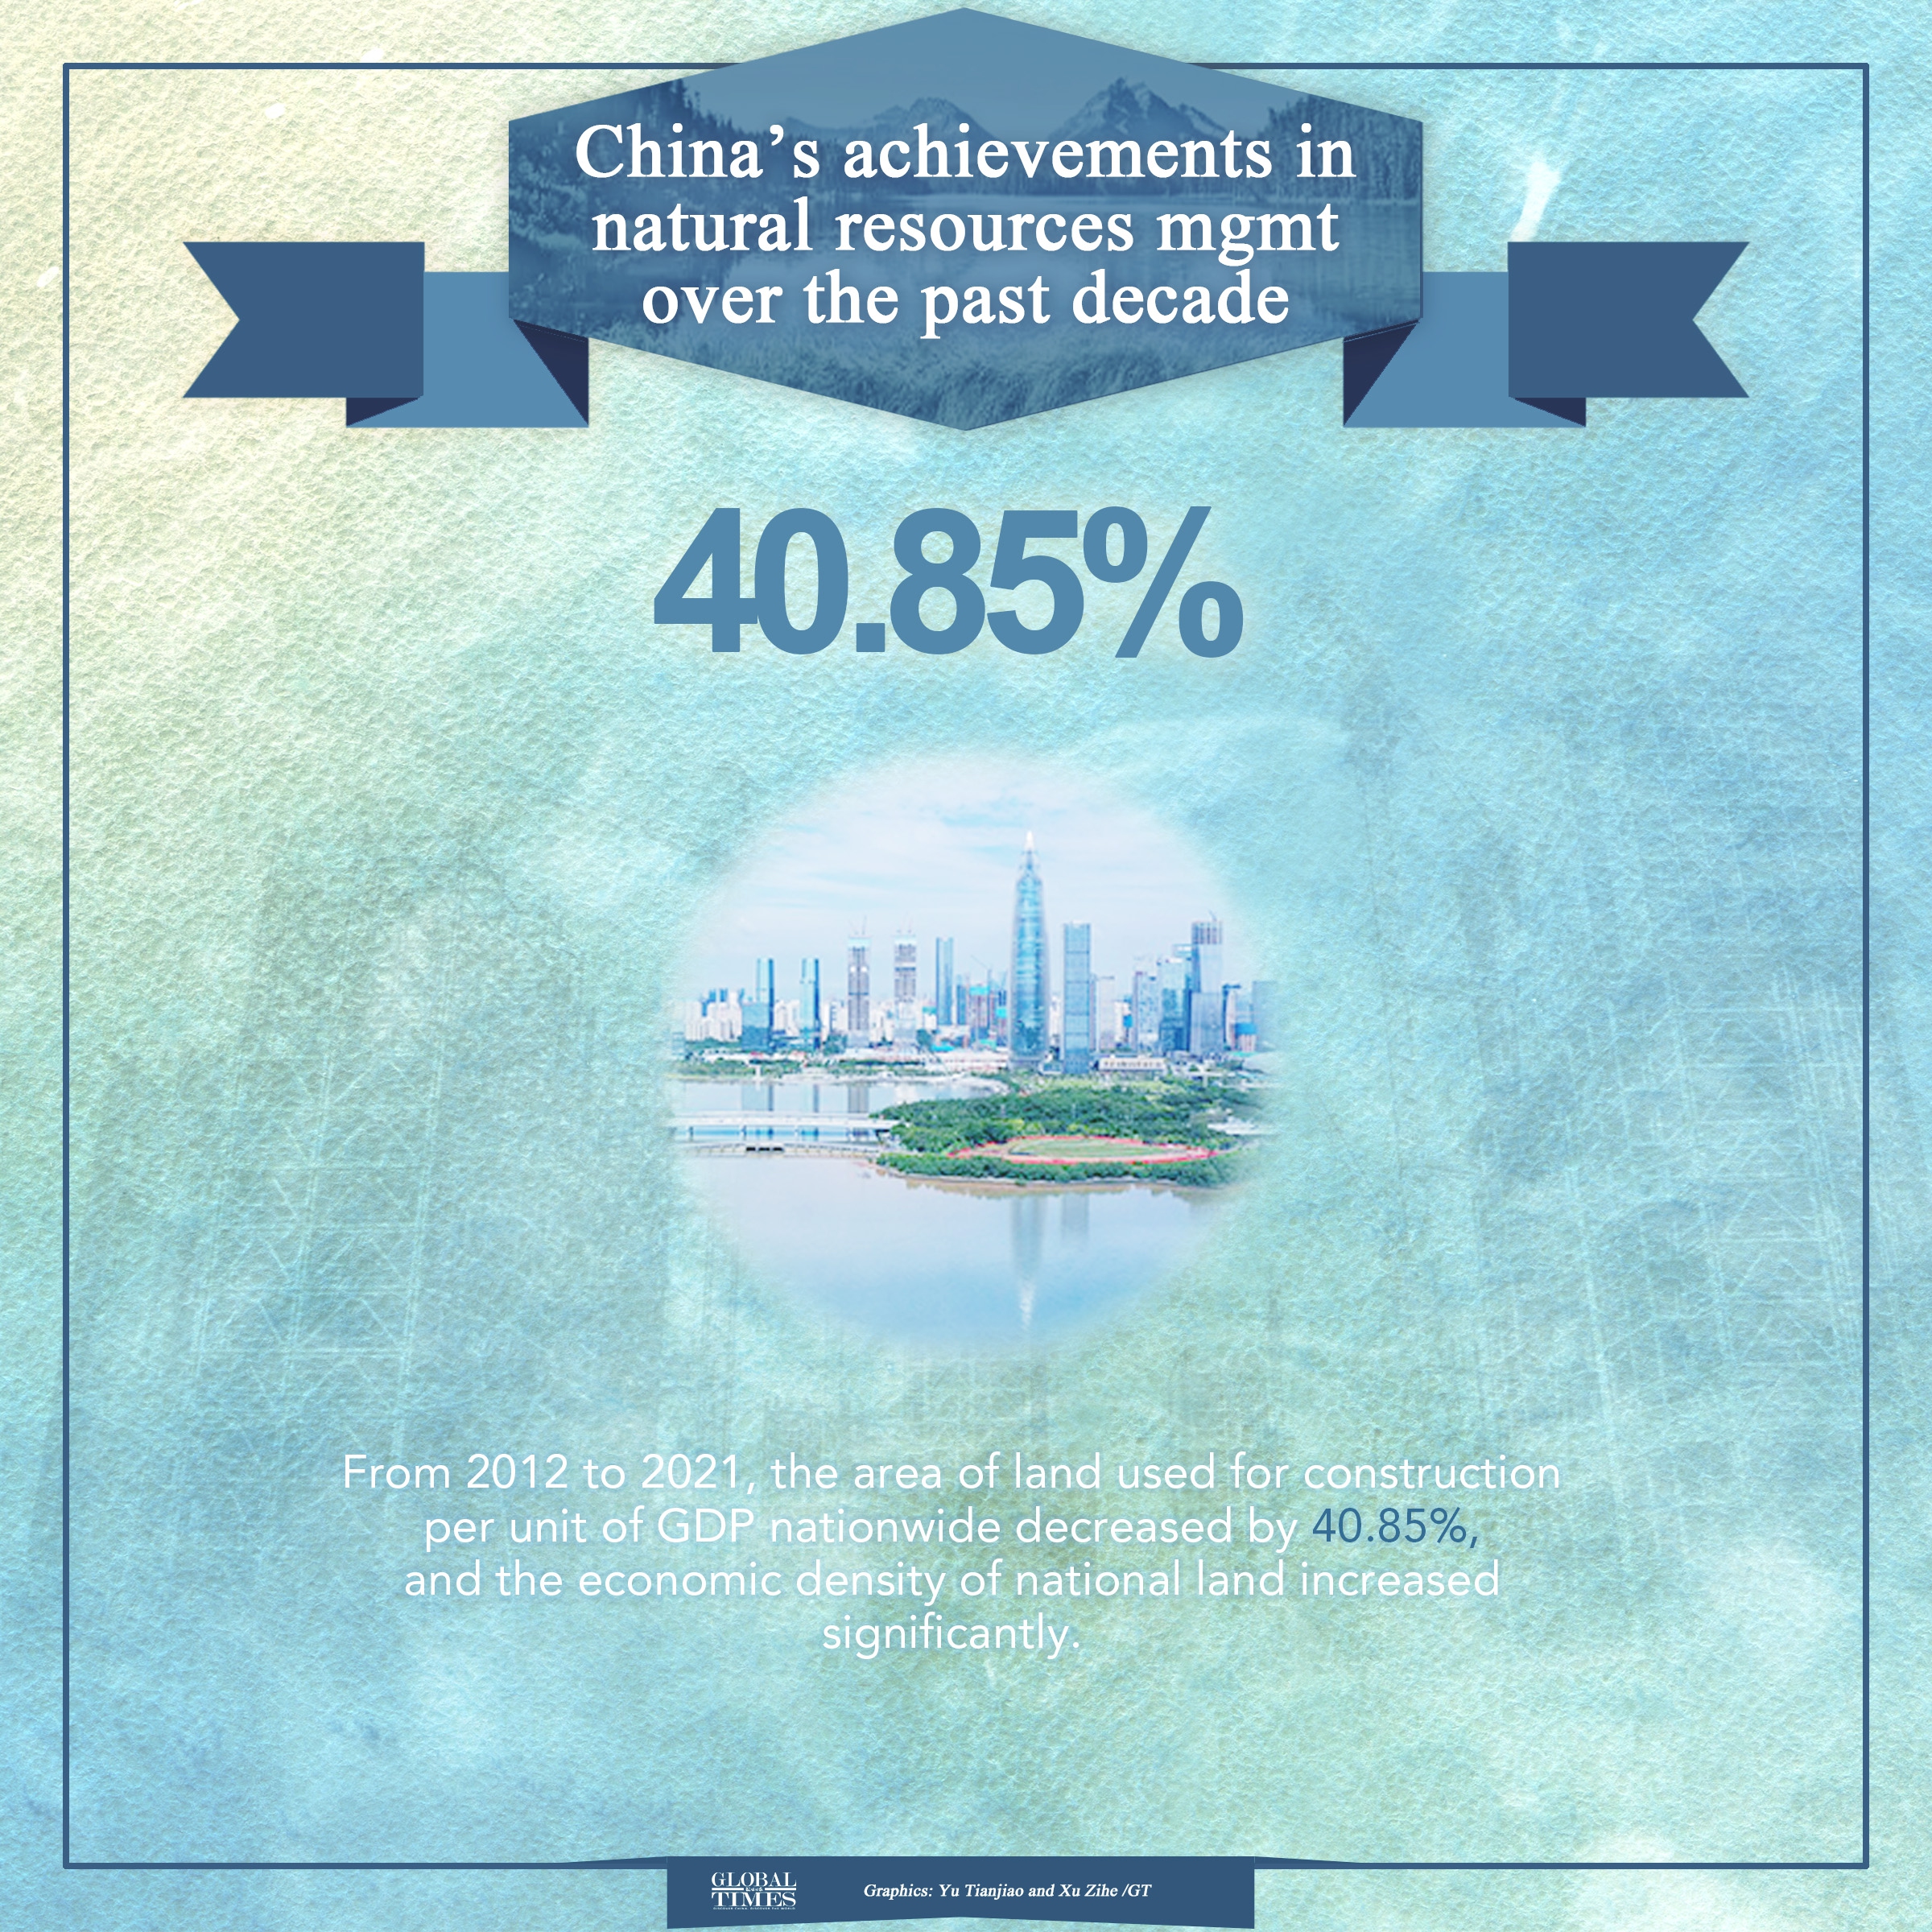 China’s achievements in natural resources management over the past decade